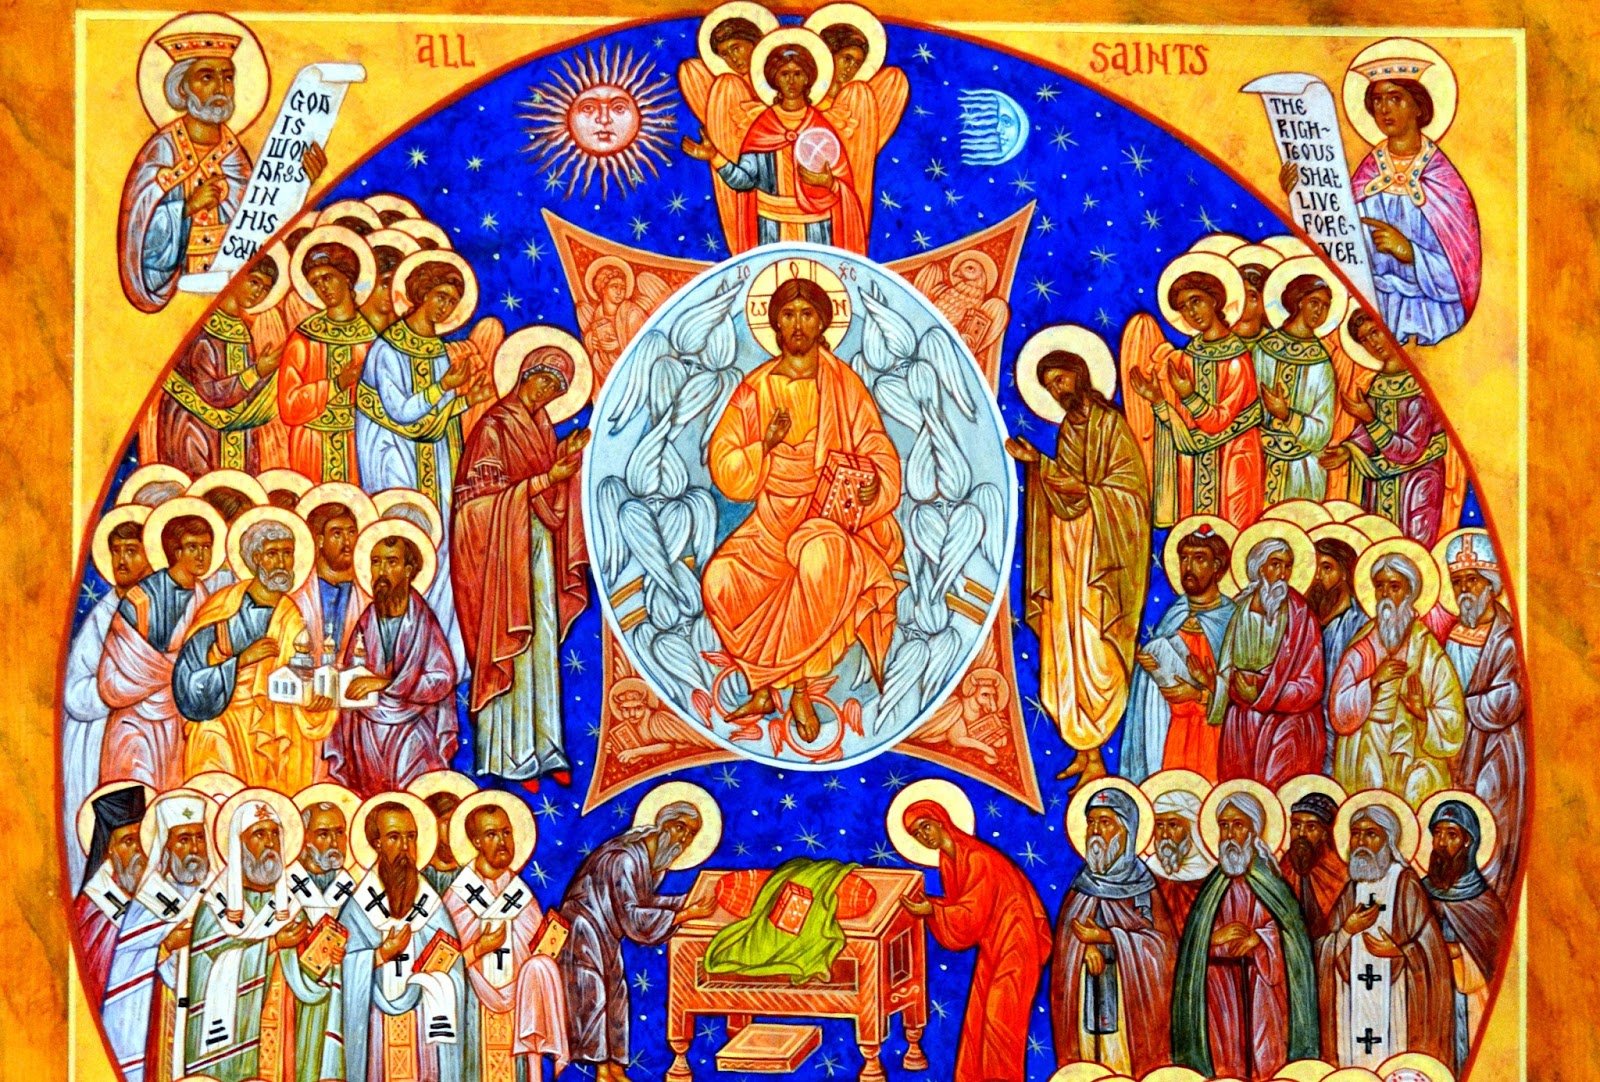 On the Veneration of the Saints: A Sermon for the Sunday of All Saints (2019)